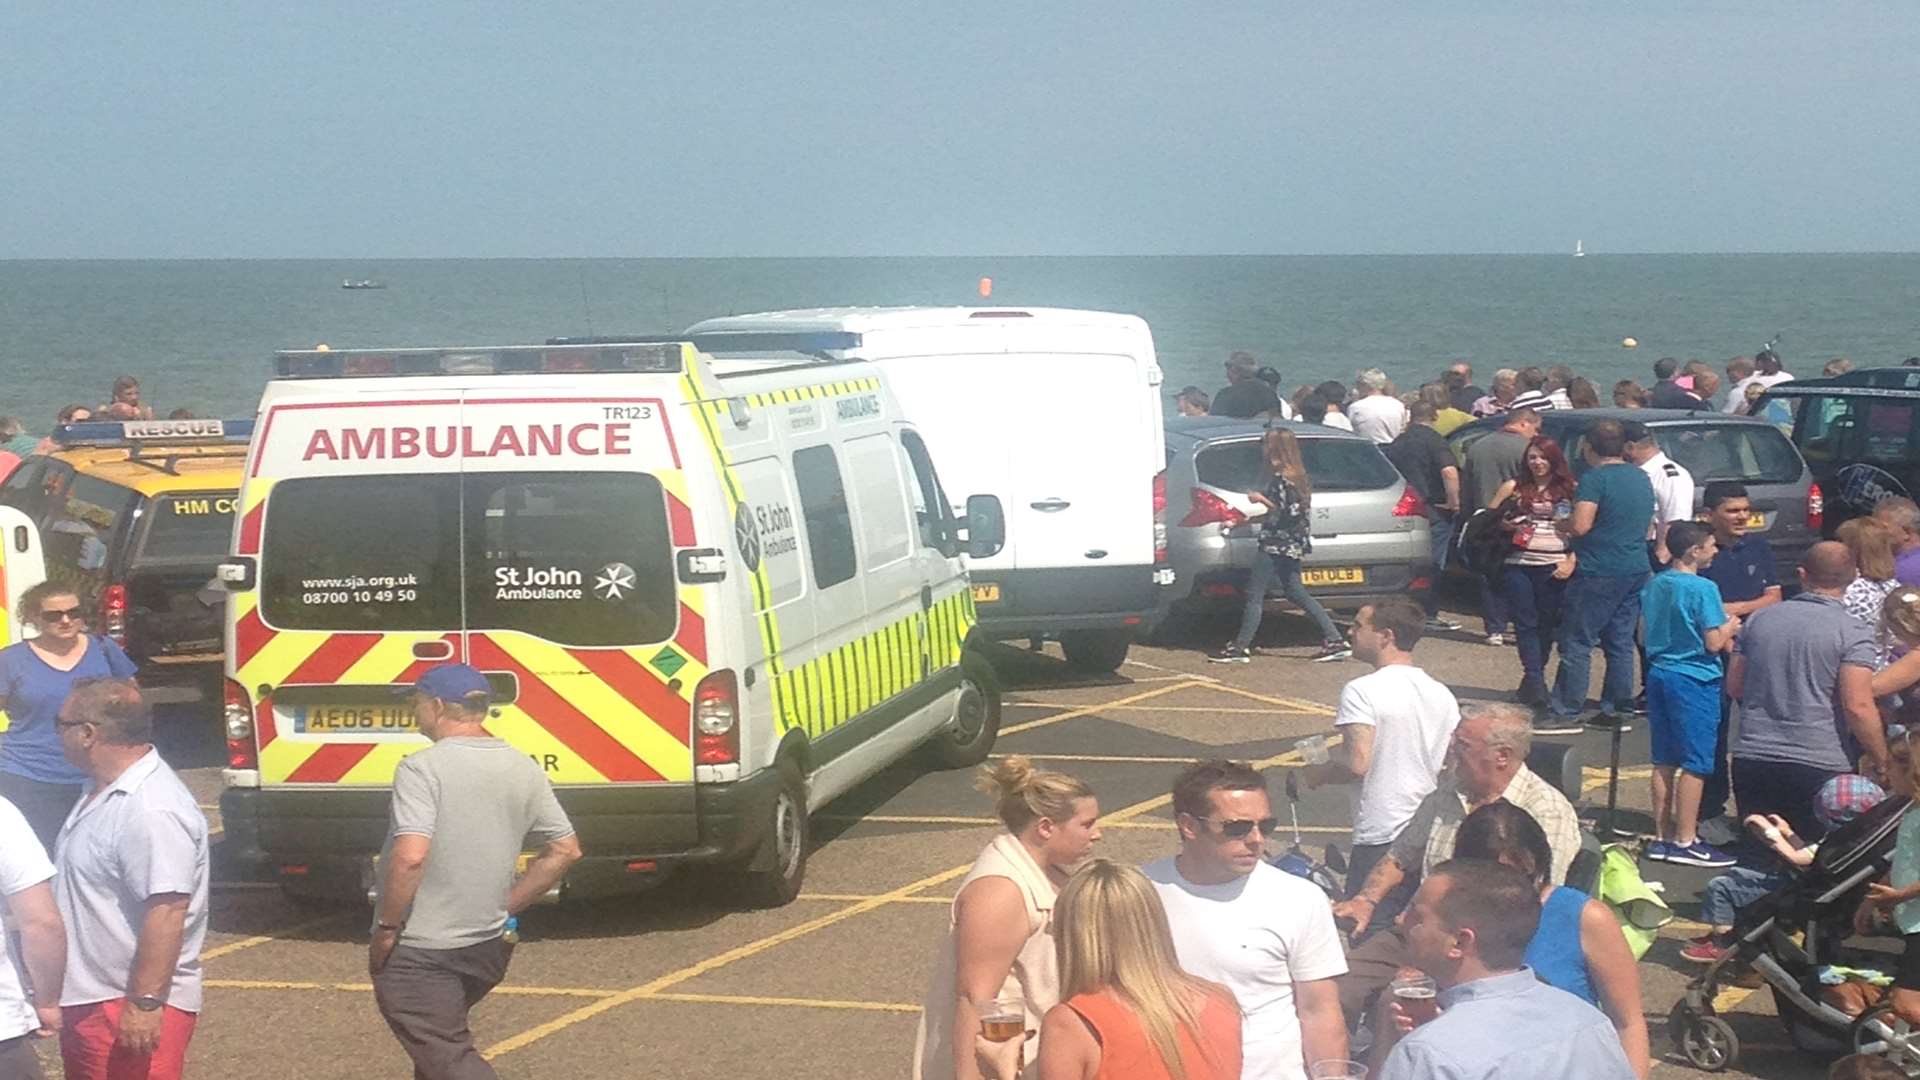 Ambulance crews had to move people out of the way to get through the crowds.